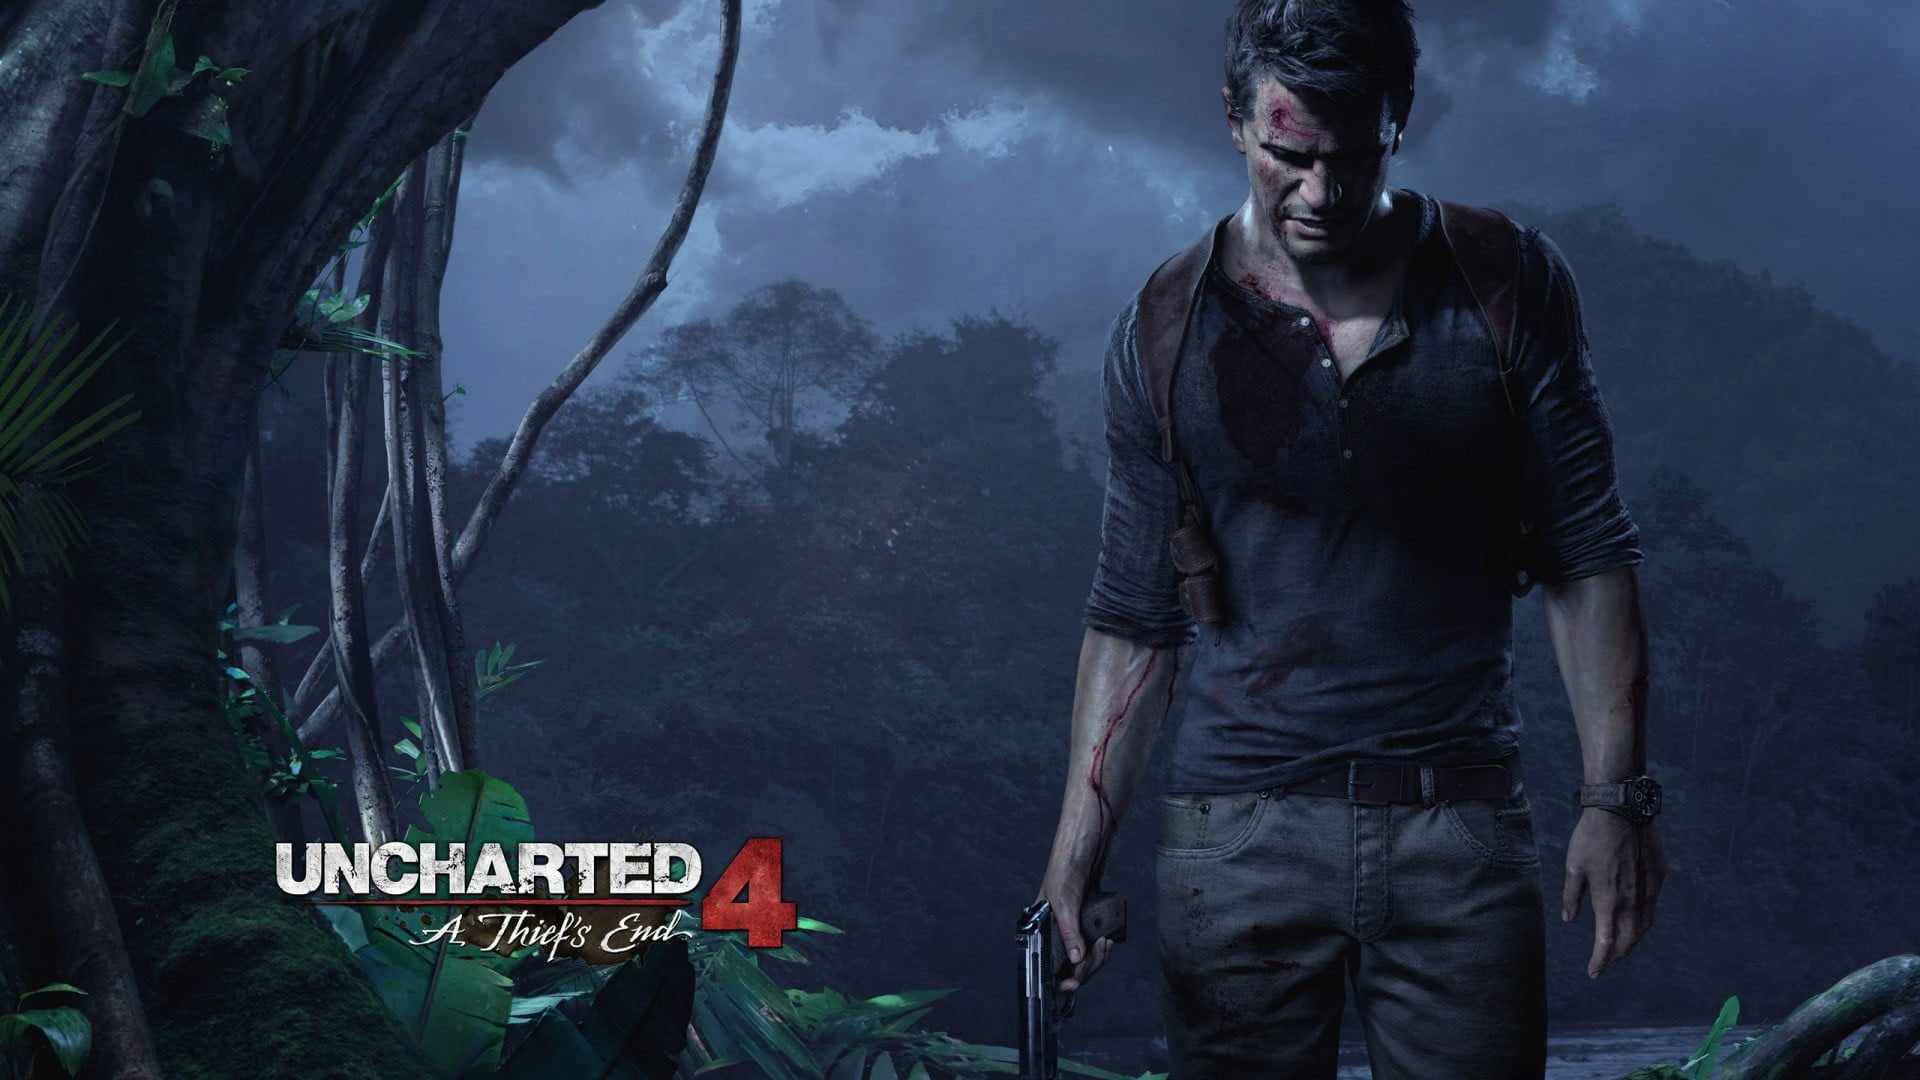 Uncharted 4 Game Wallpaper, Uncharted